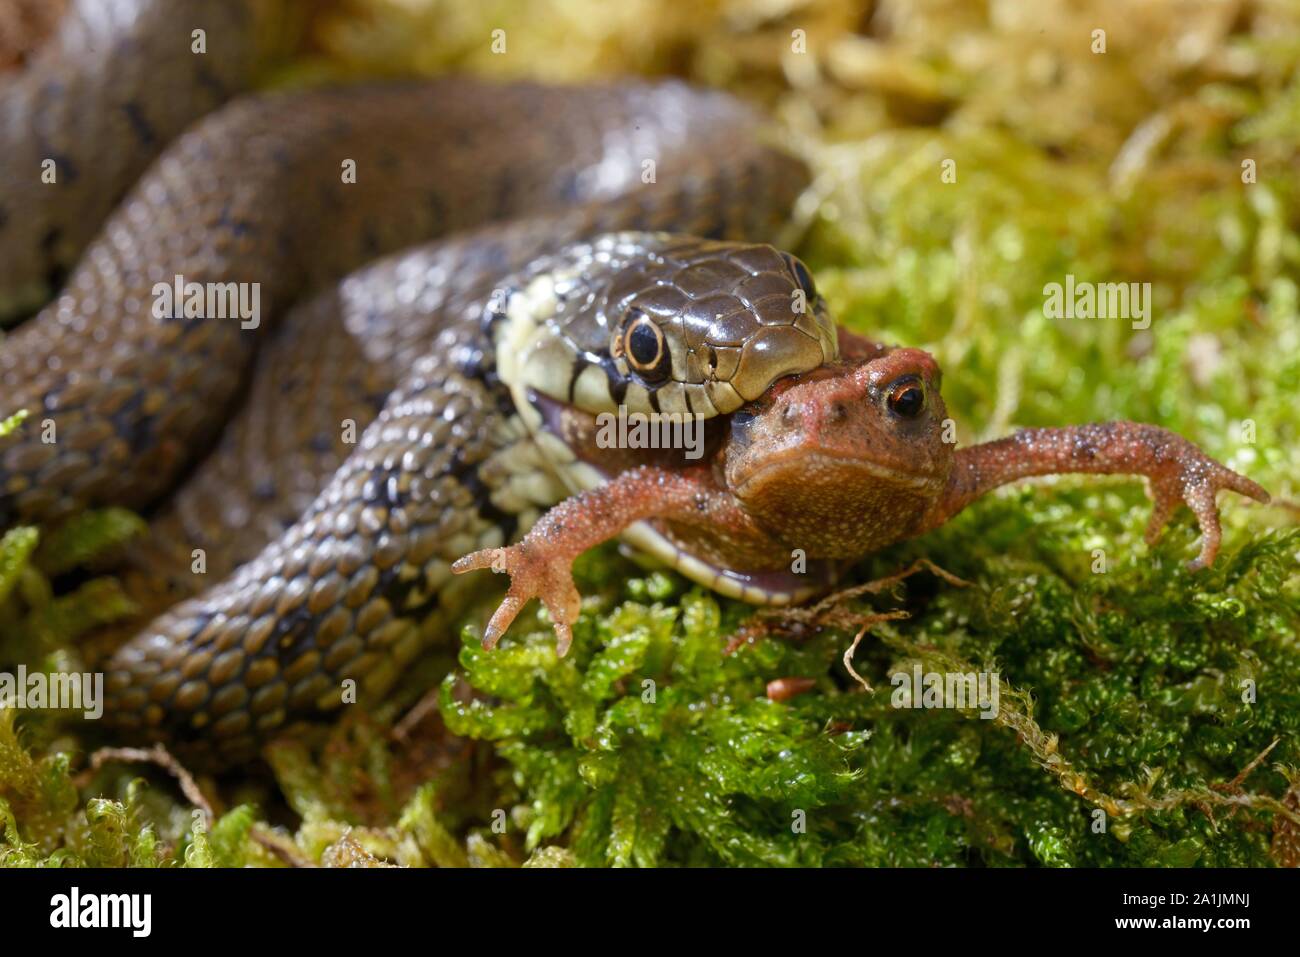 Barred grass snake (Natrix helvetica), eating a toad, Poitou, France Stock Photo